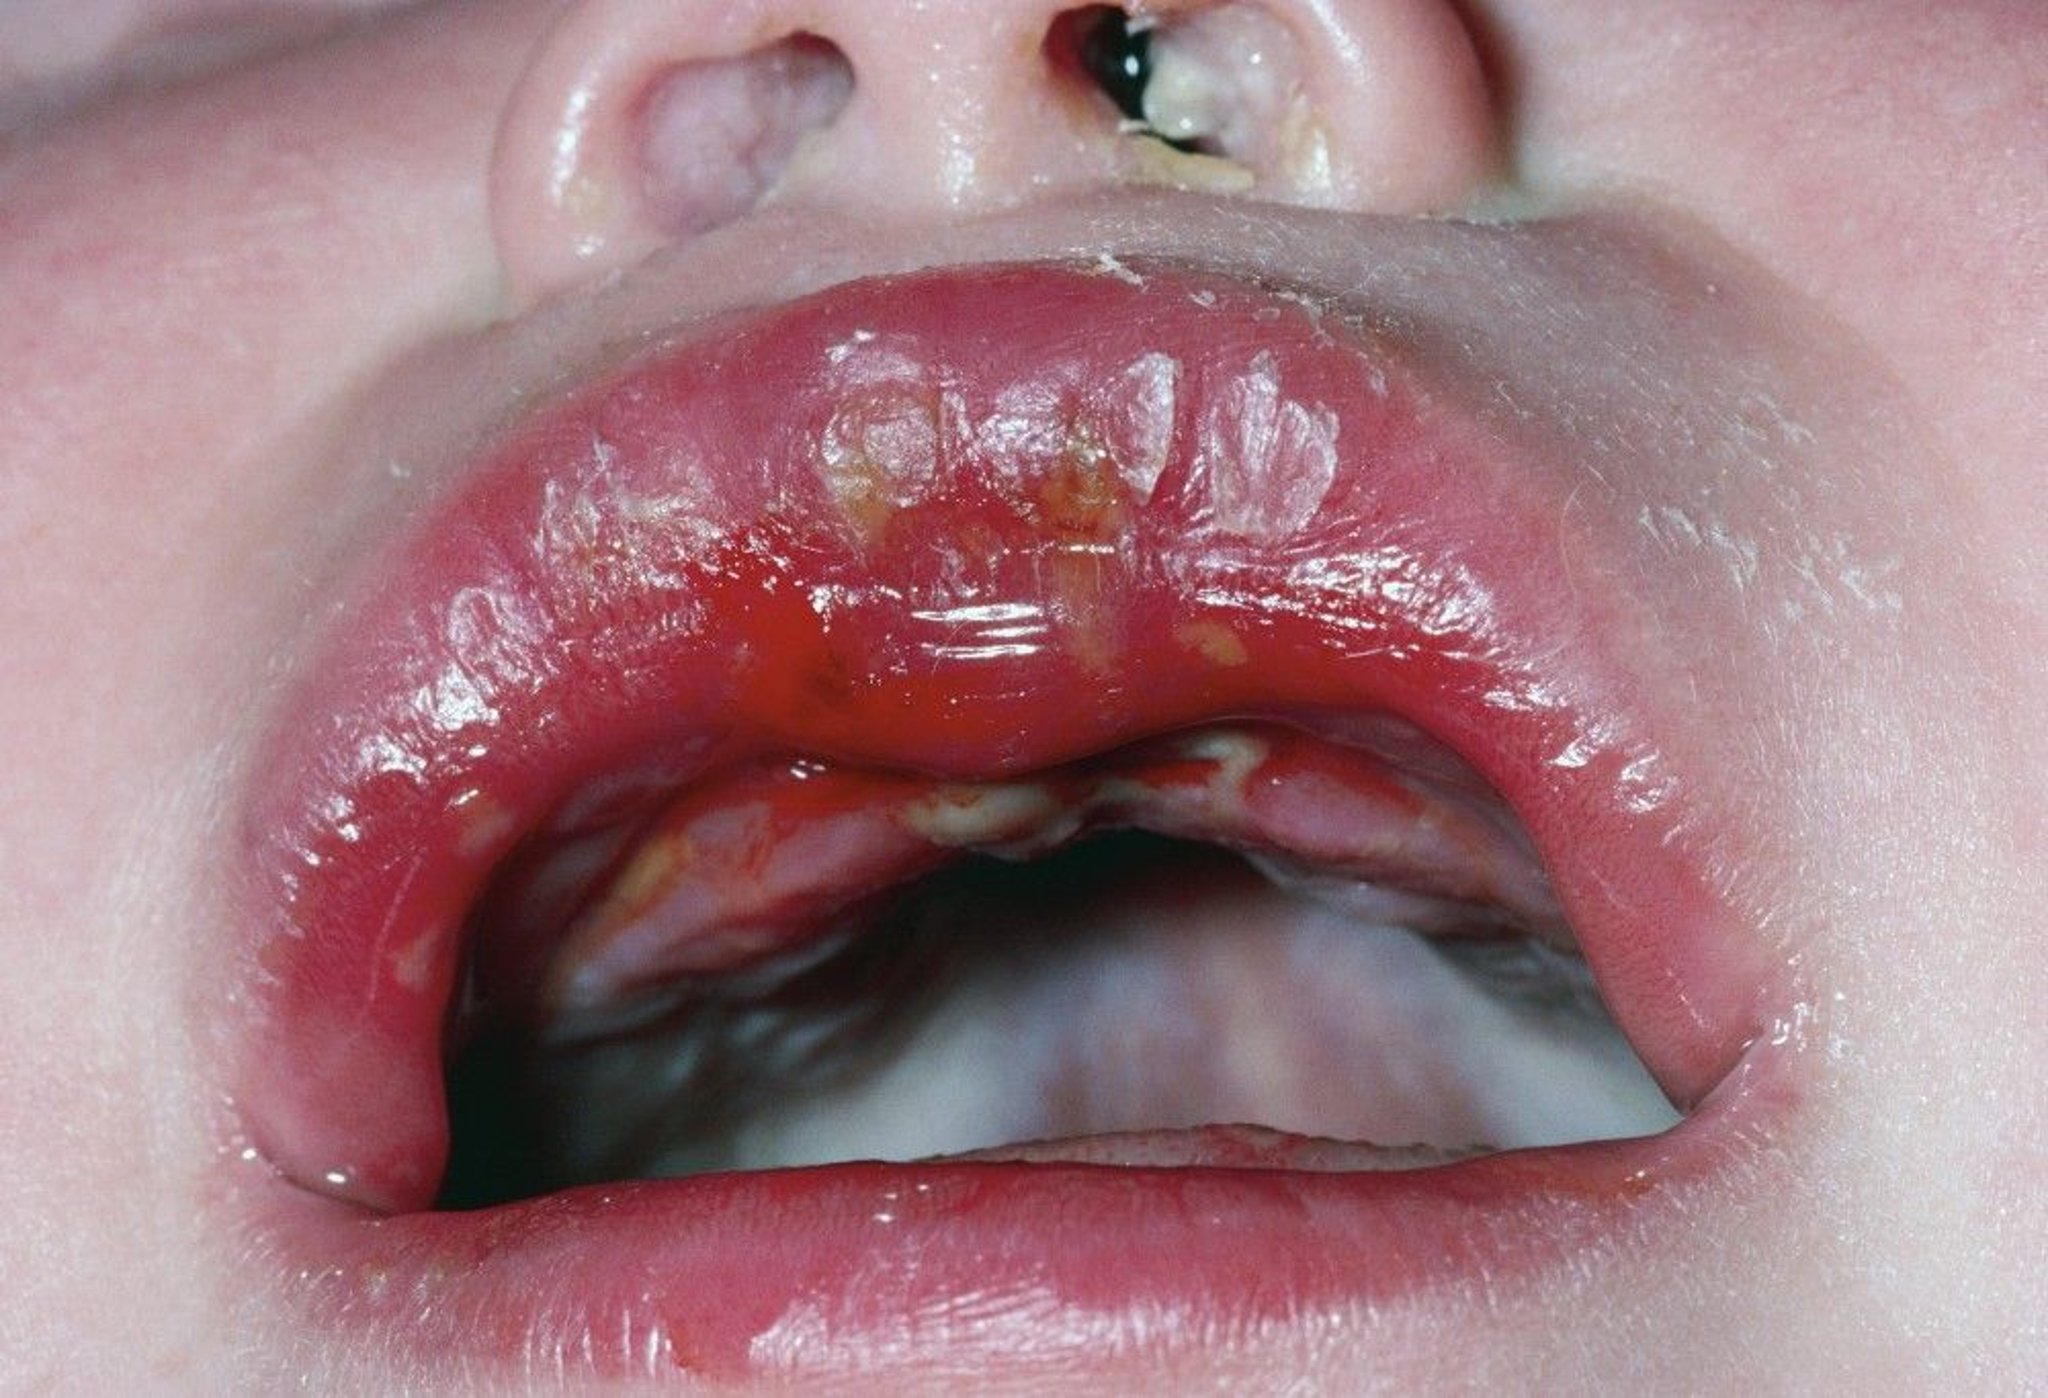 Mouth Sores in Herpes Simplex Virus Infection